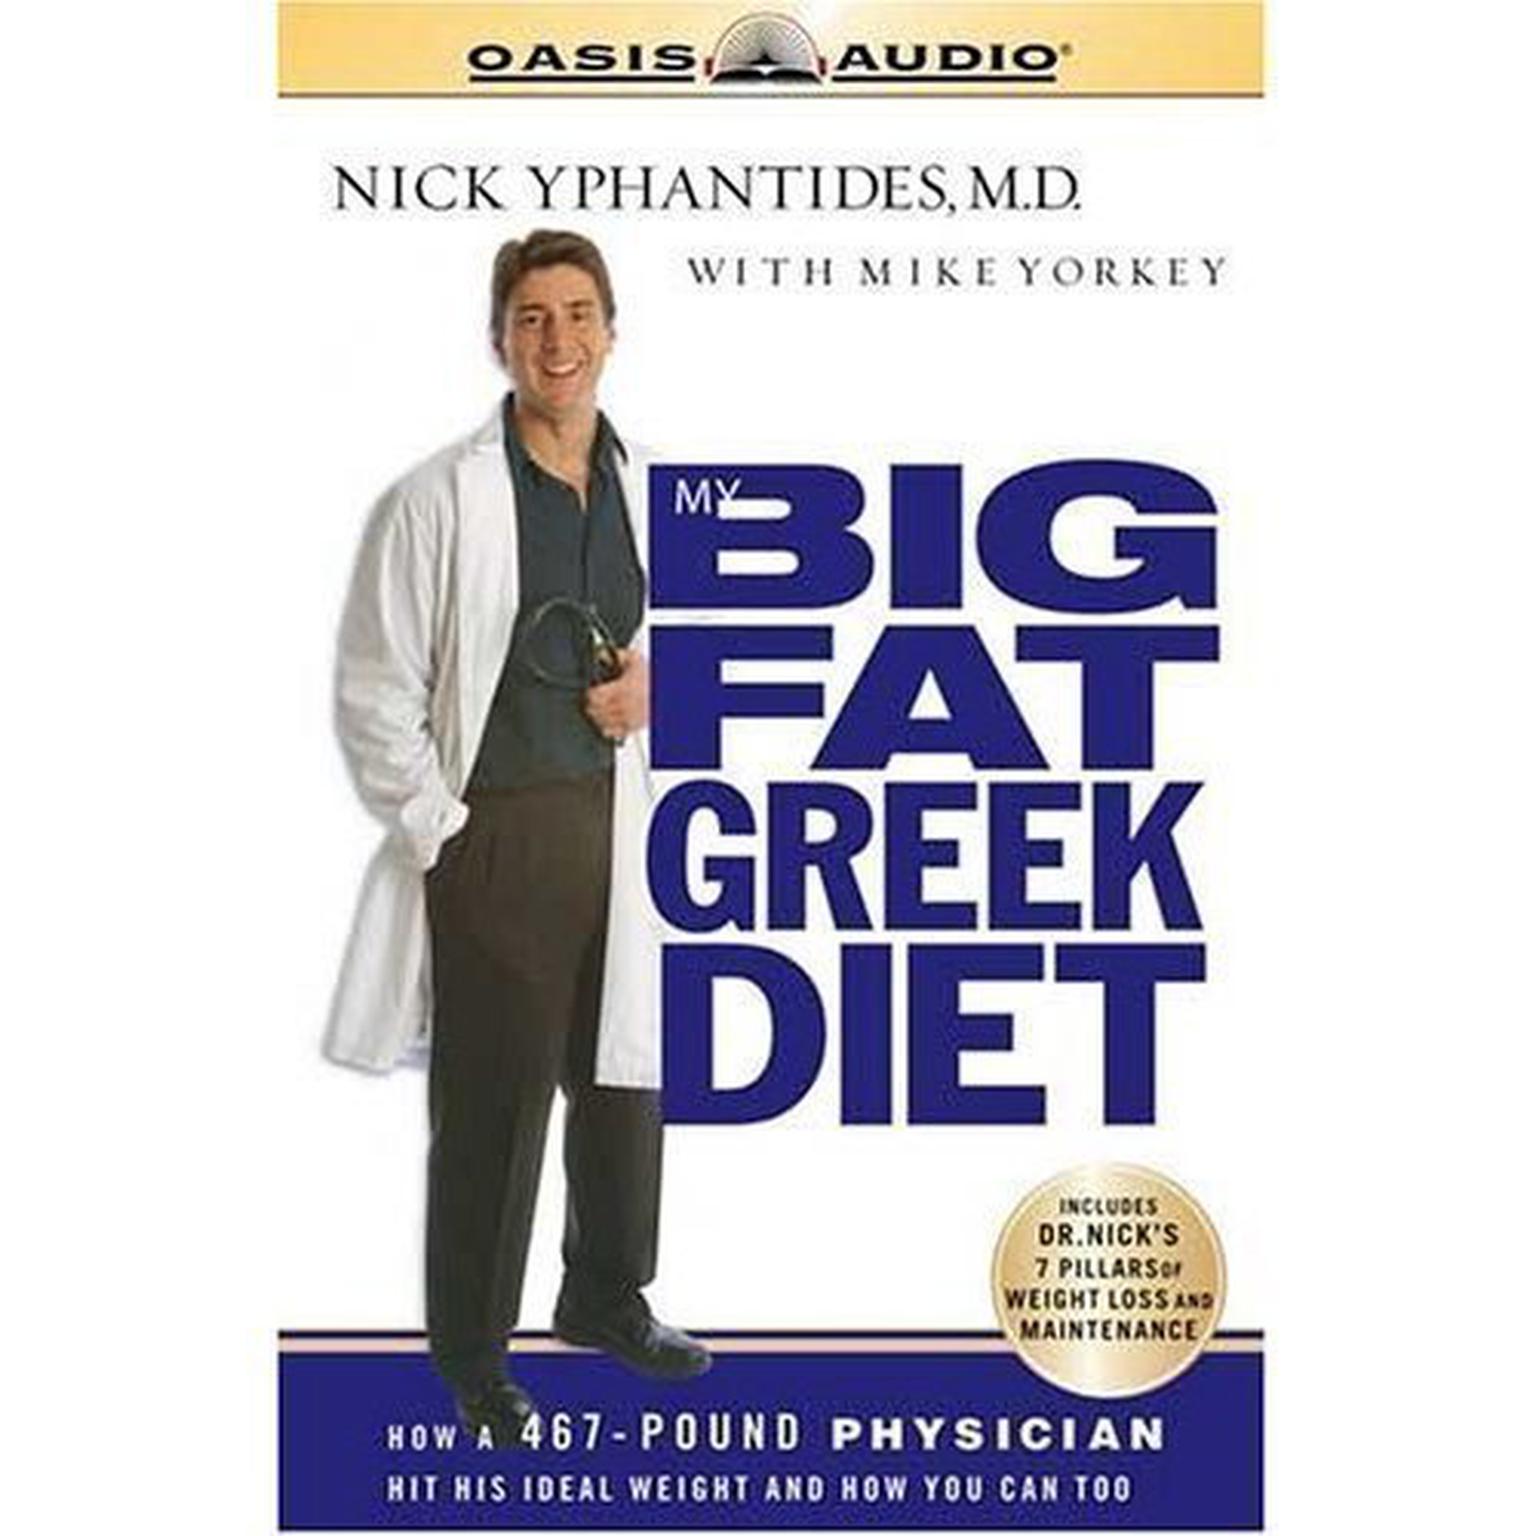 My Big Fat Greek Diet (Abridged): How a 467 Pound Physician Hit His Ideal Weight and You Can Too Audiobook, by Nick Yphantides